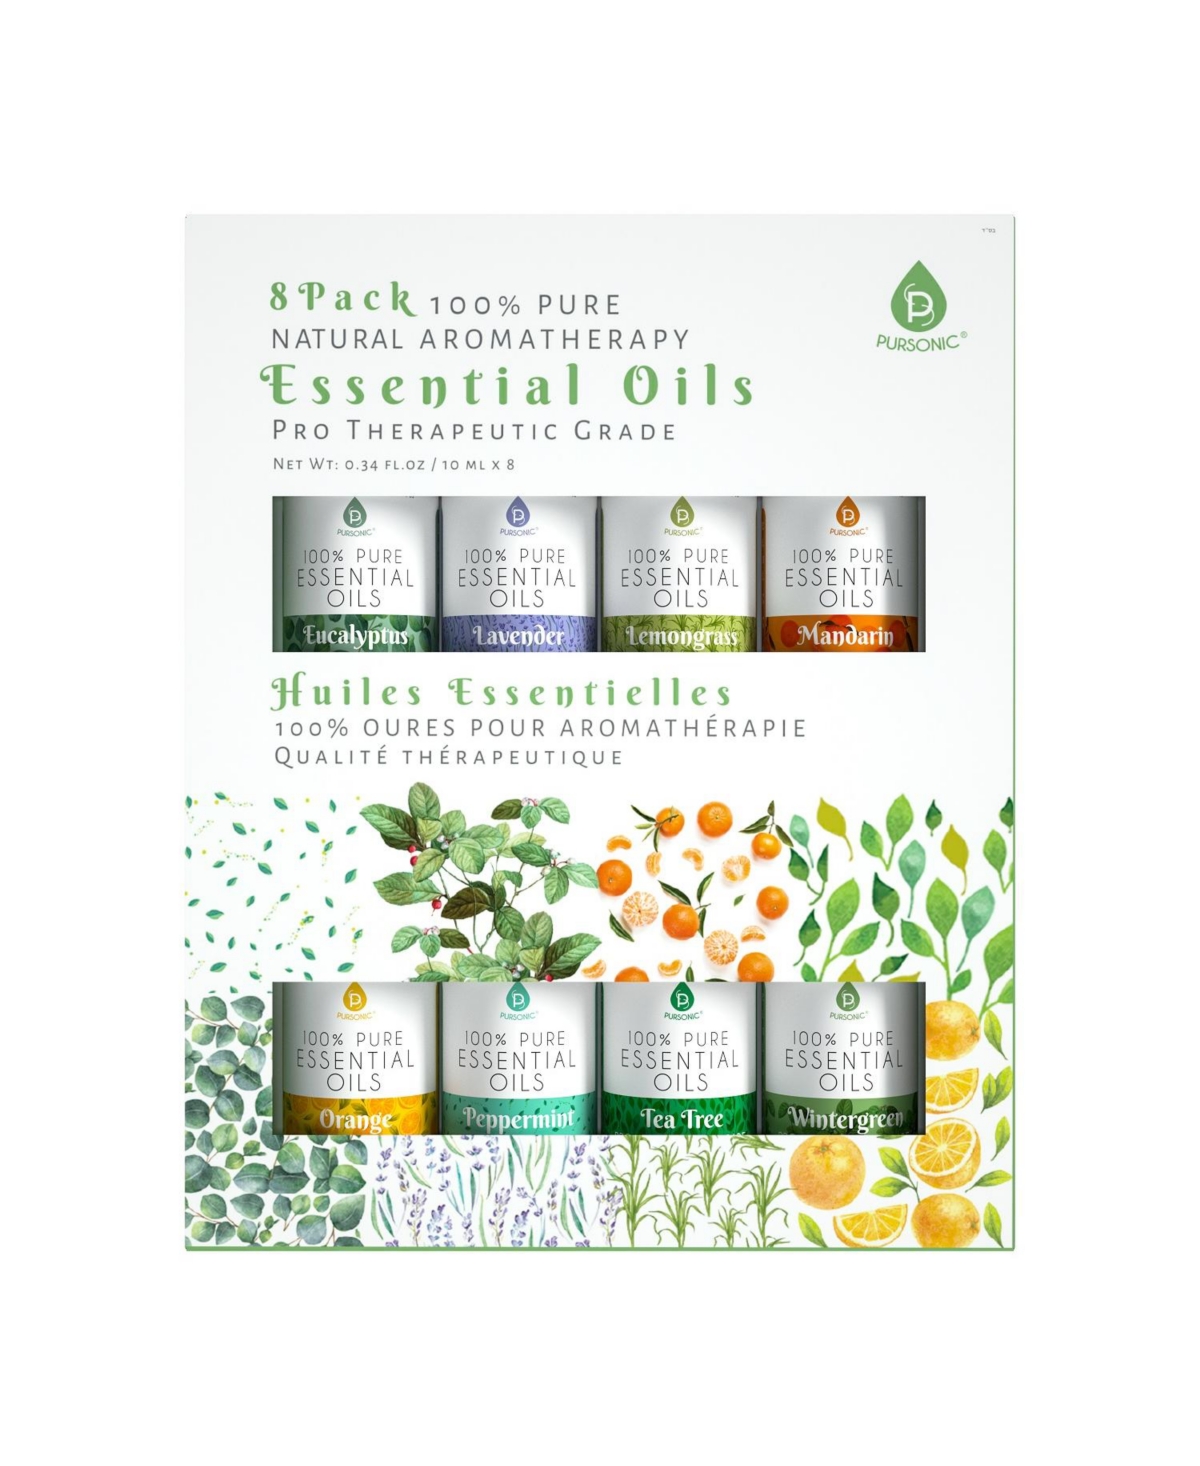 8 pack of 100% Pure Essential Aromatherapy Oils - Natural